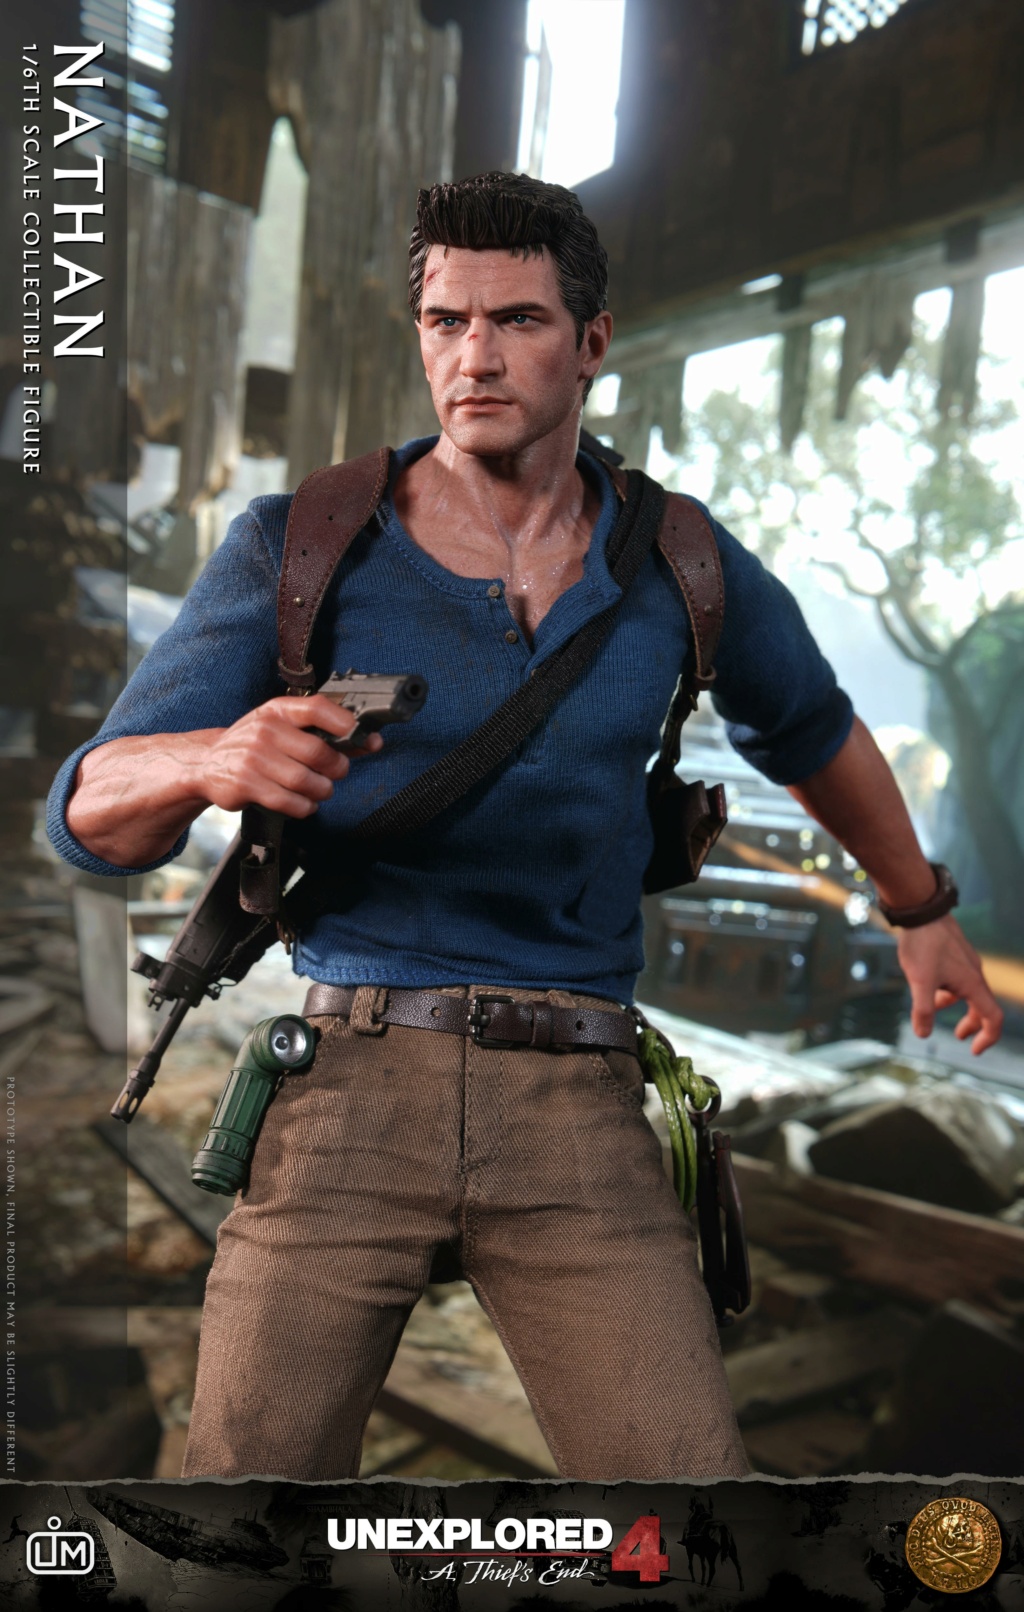 videogame-based - NEW PRODUCT: Limtoys: LIM012 1/6 Scale NATHAN -UNEXPLORED 4 43128710